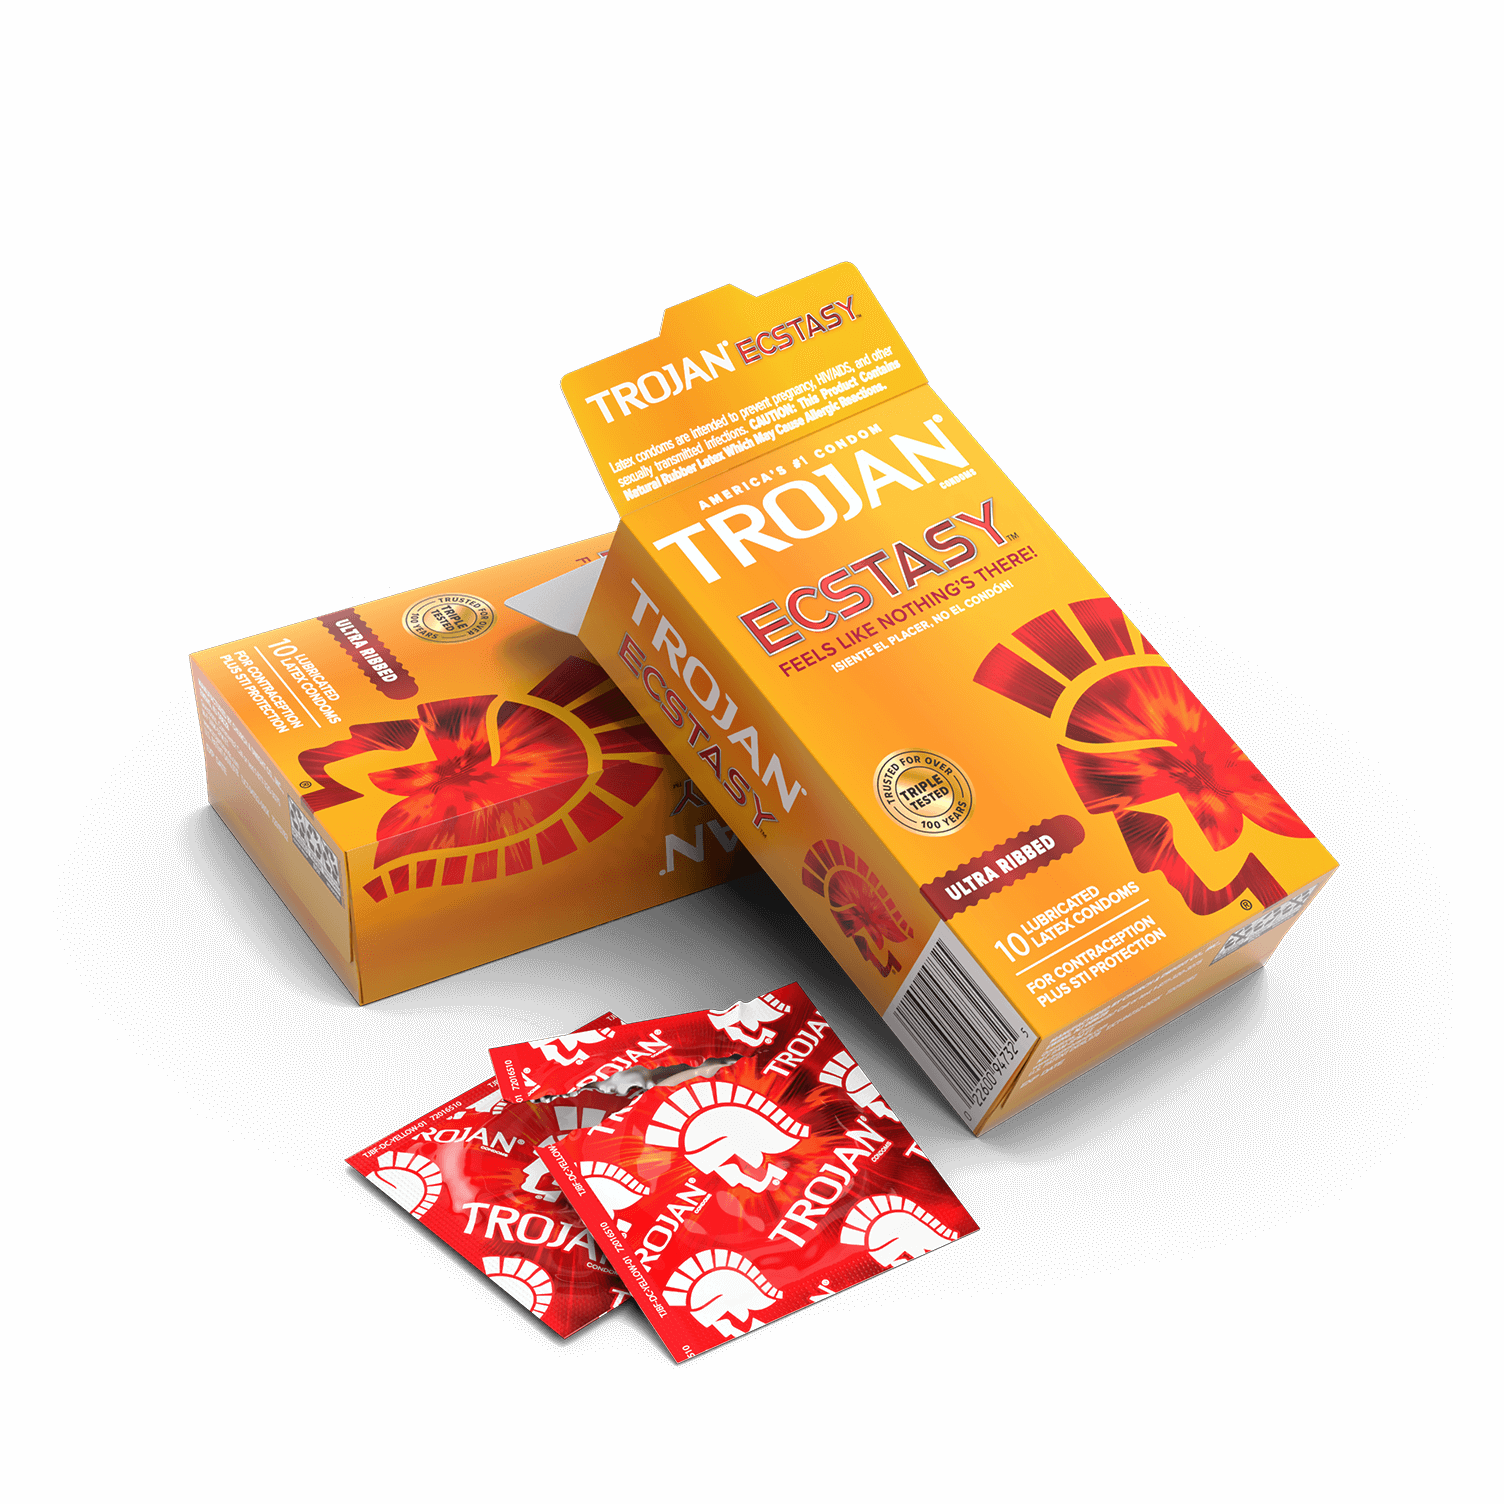 Trojan Ecstasy Ultra Ribbed Condom package and wrapper.